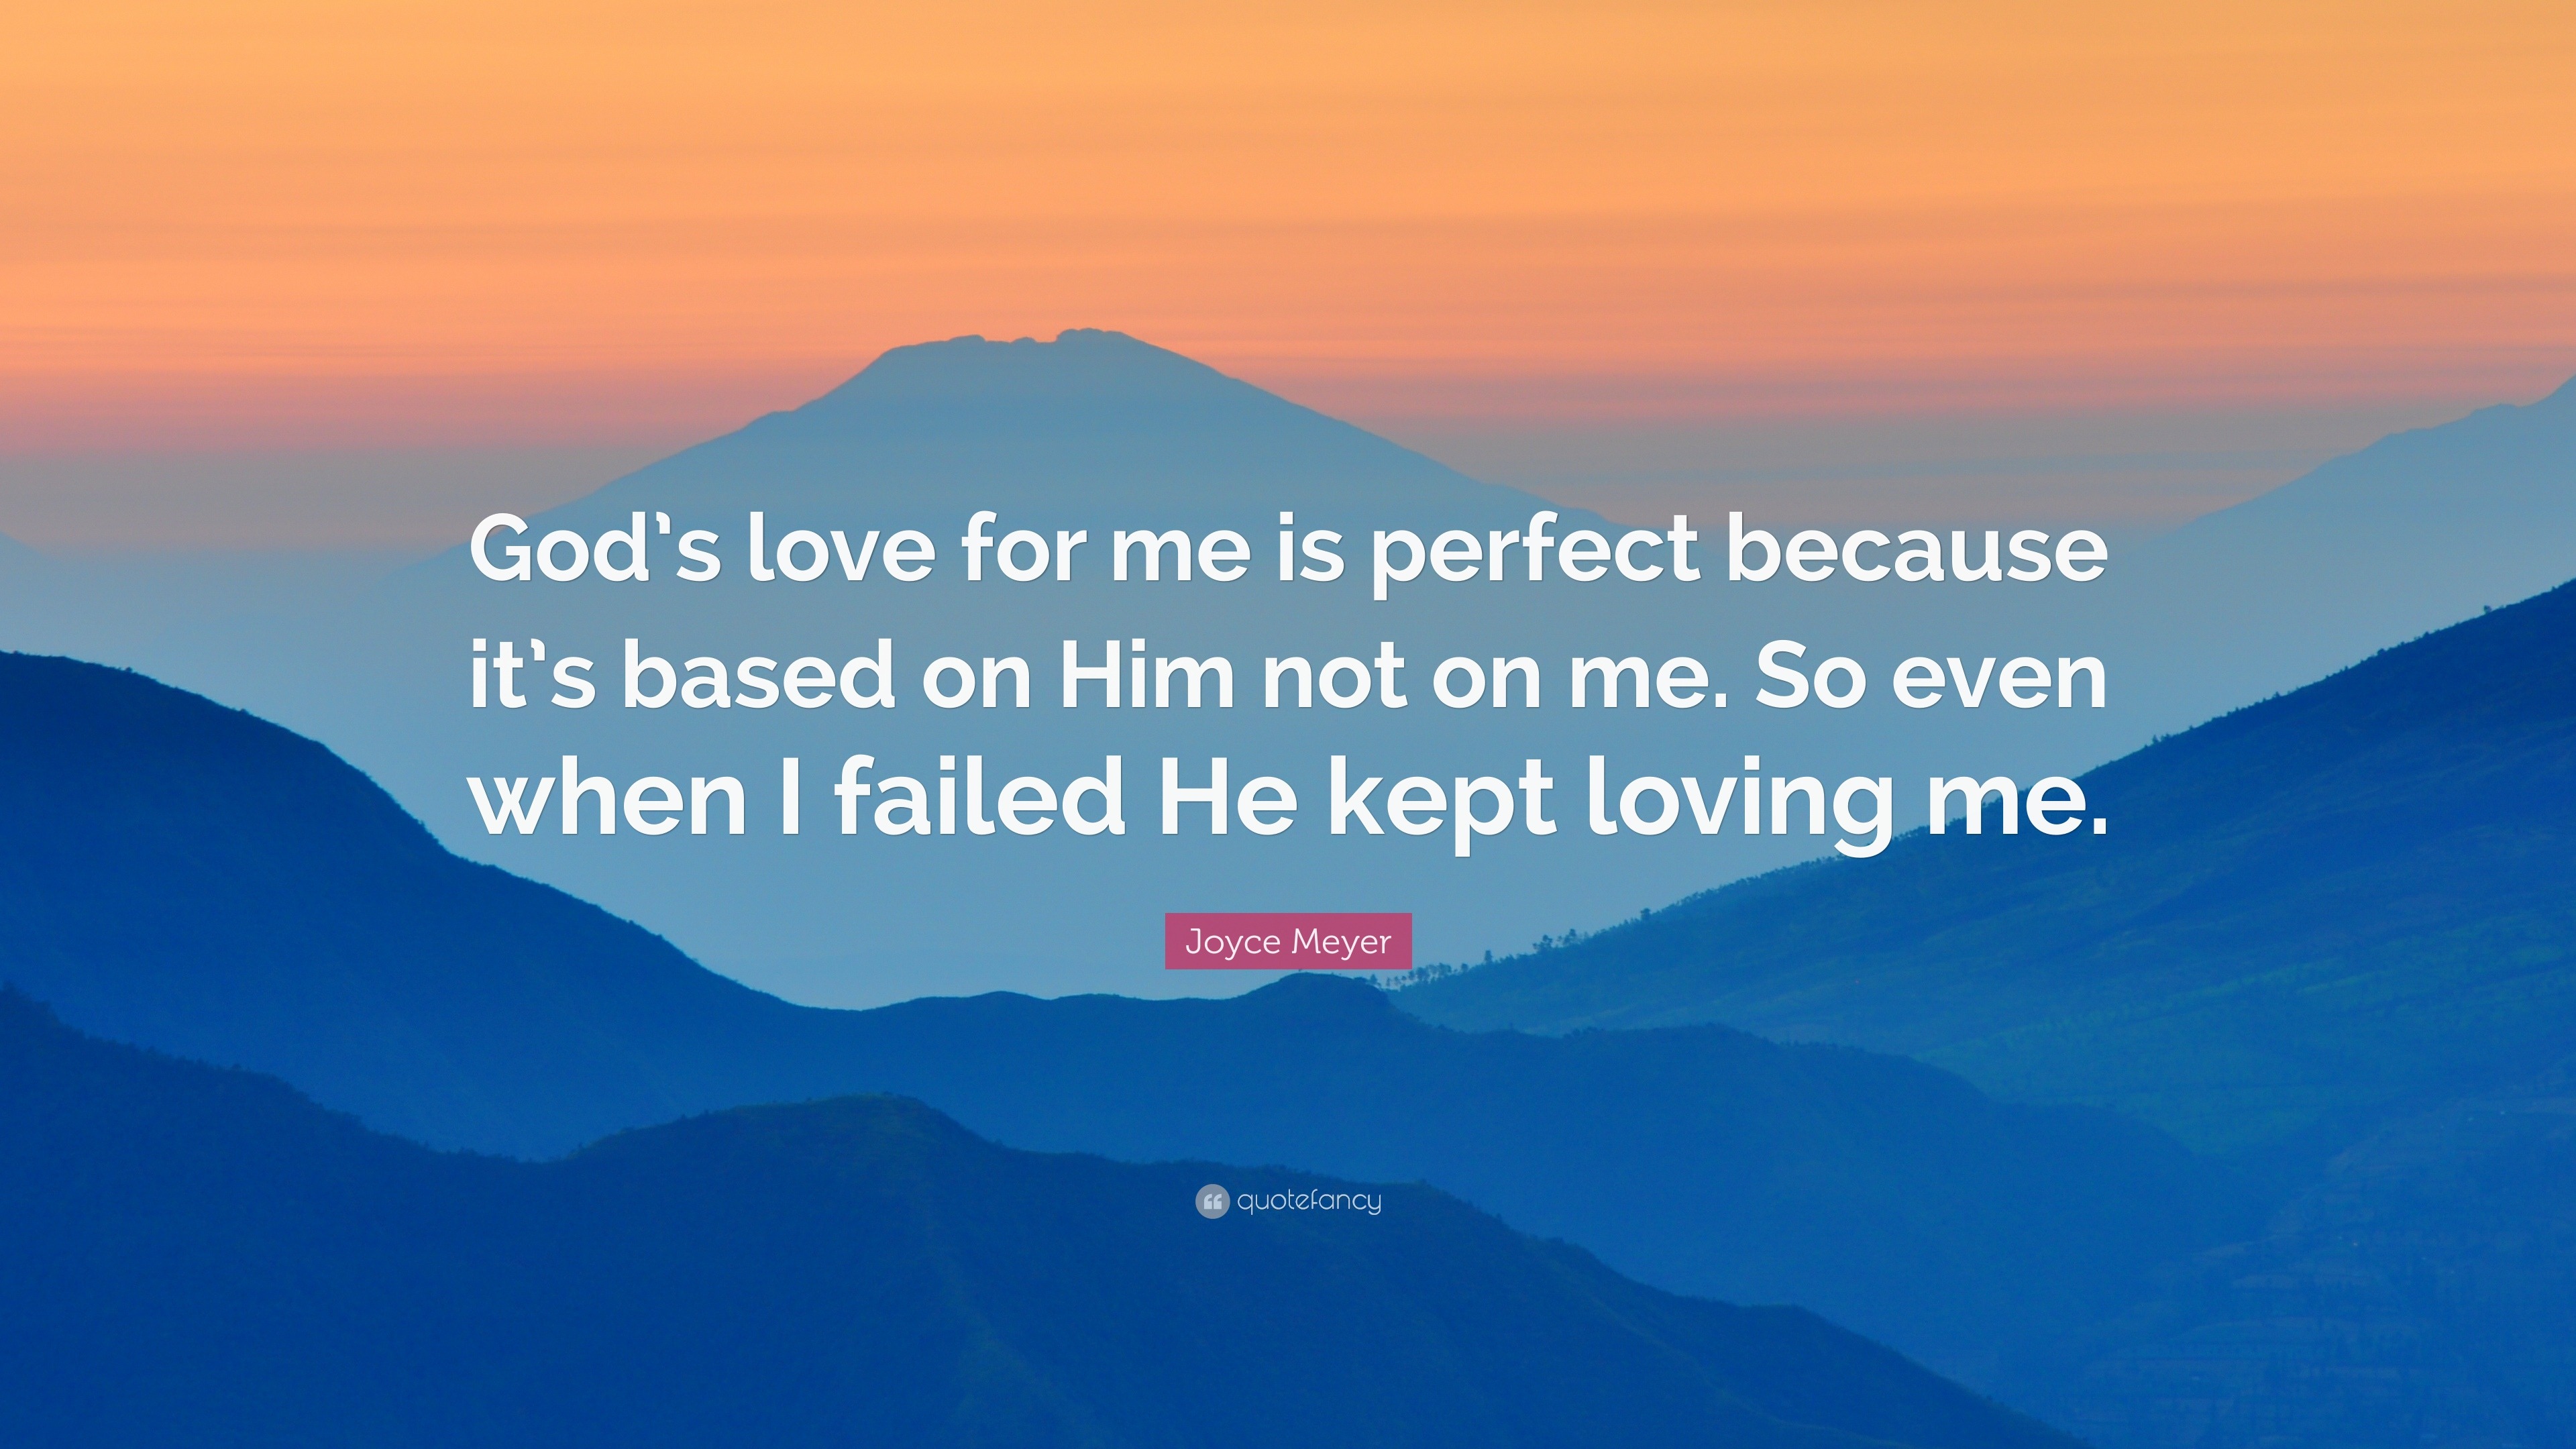 Joyce Meyer Quote “God s love for me is perfect because it s based on Him